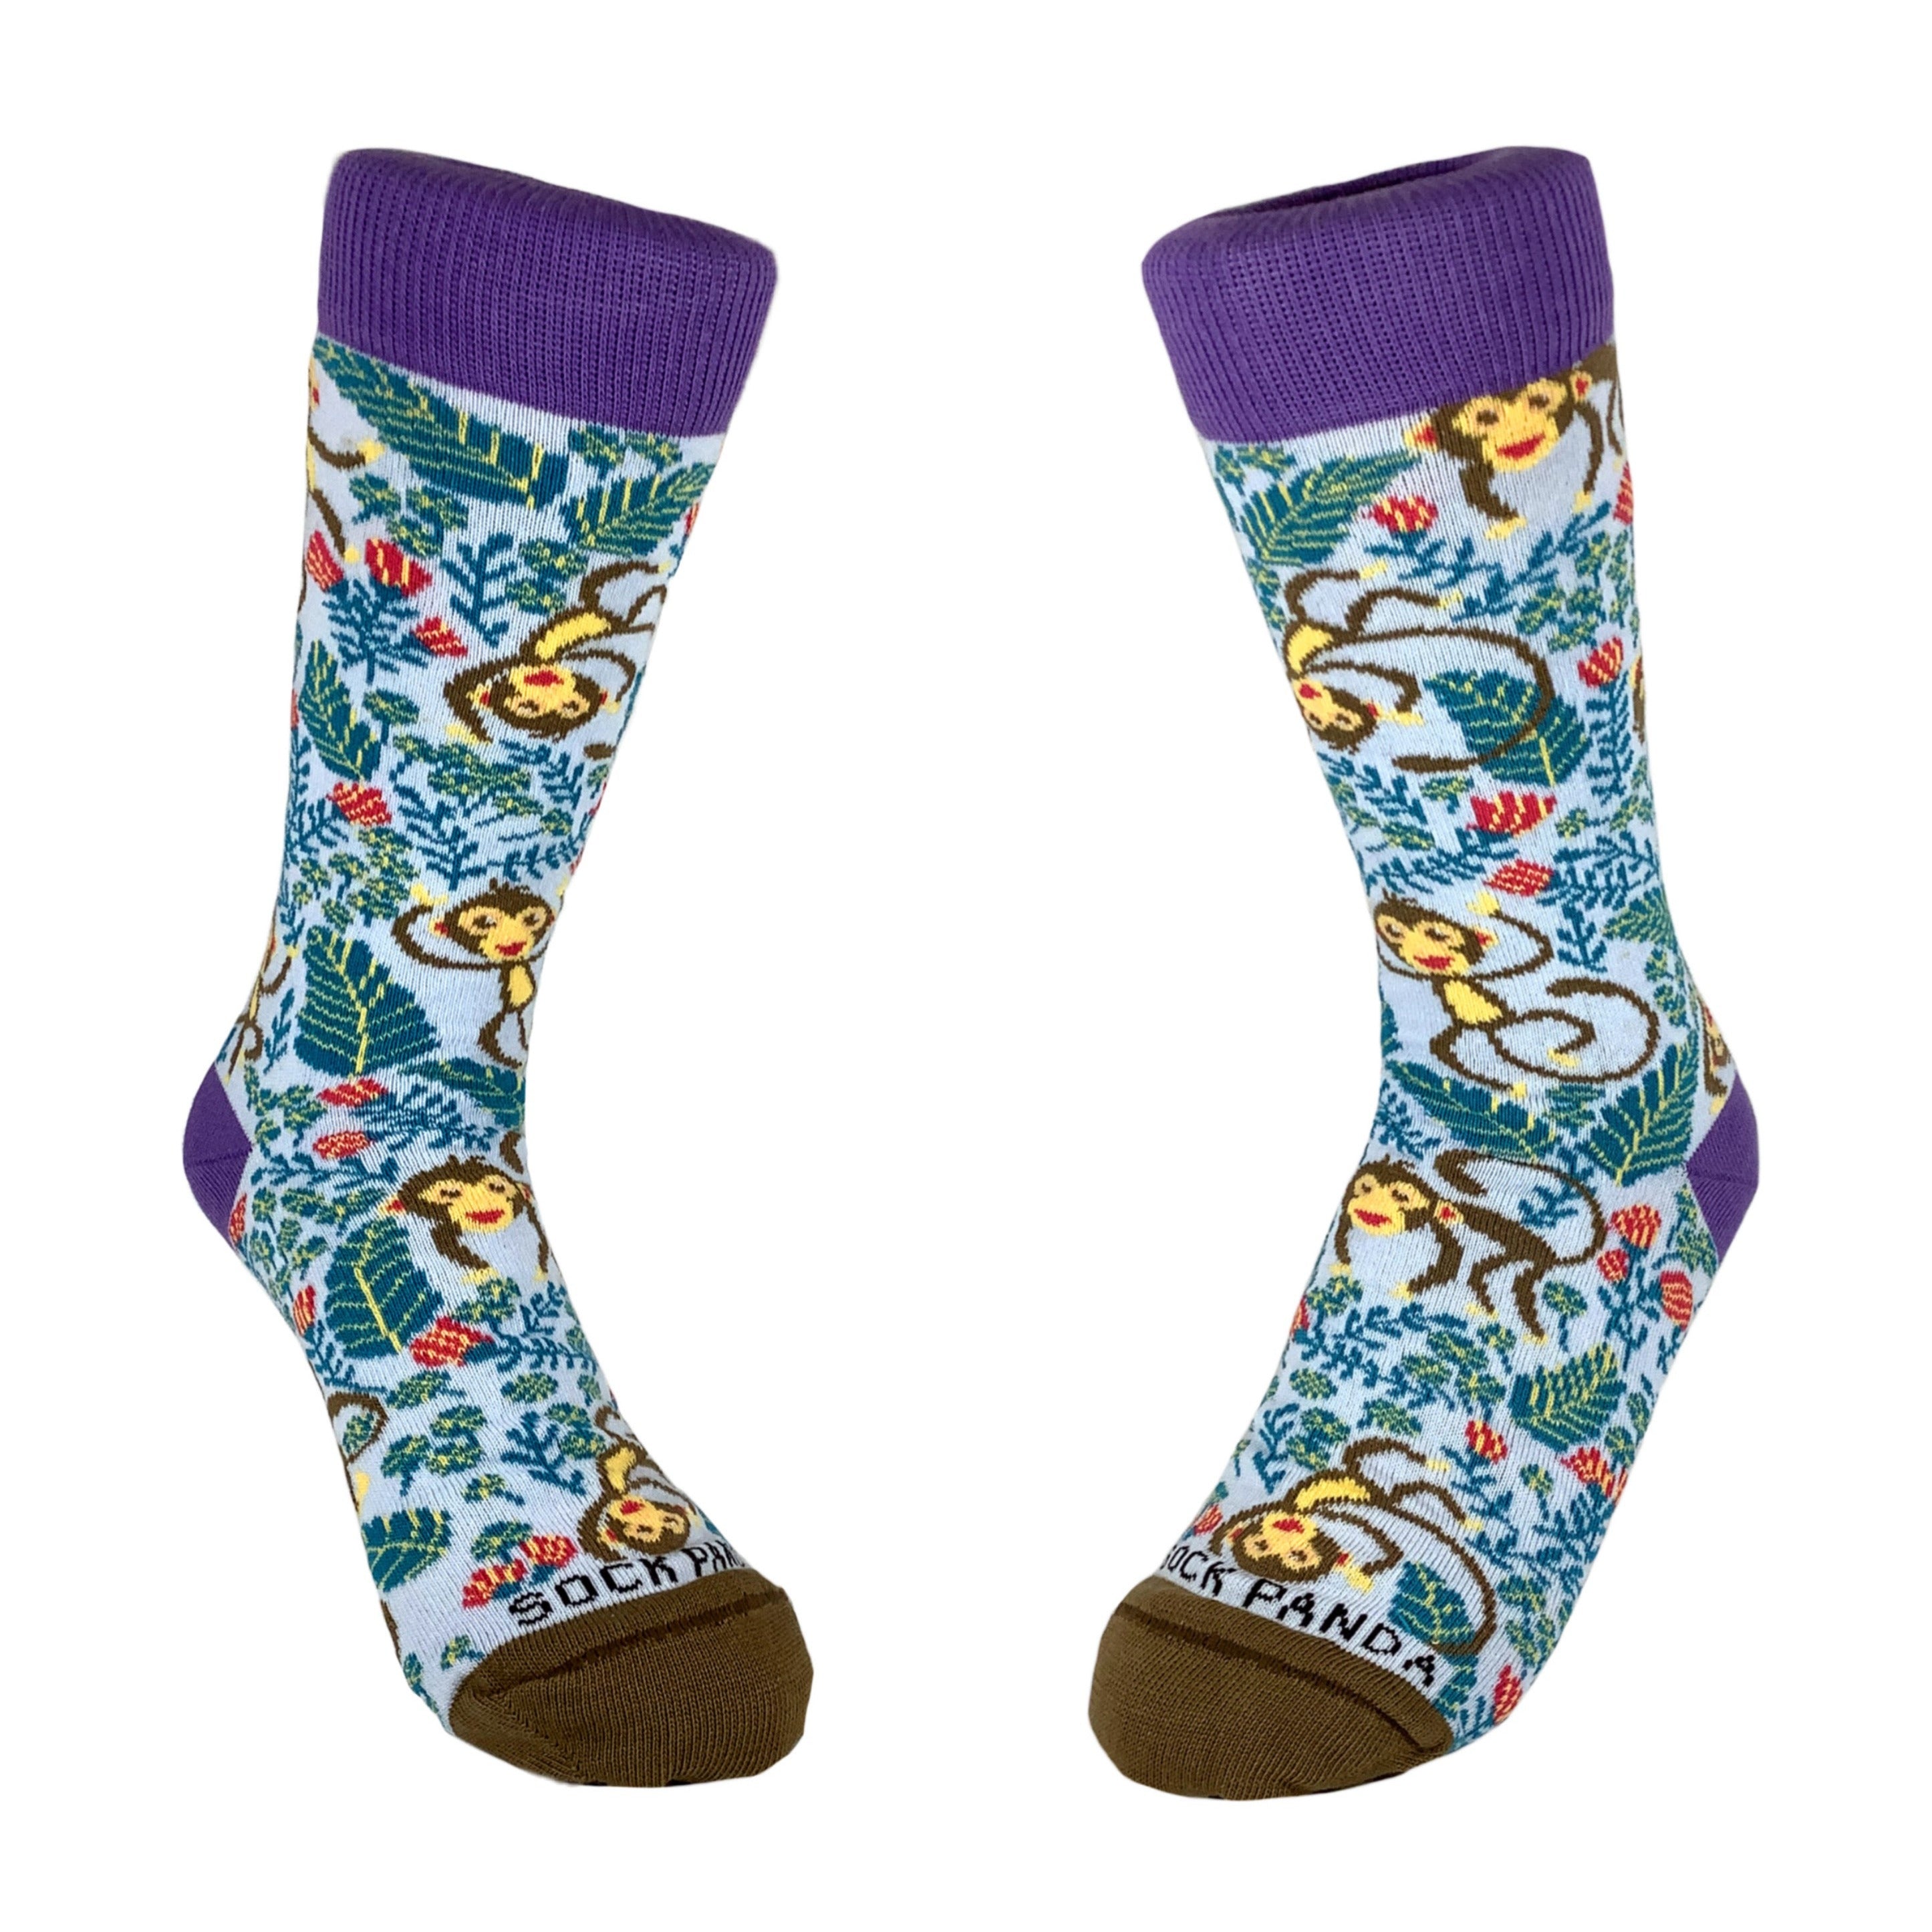 Monkey Playing Socks from the Sock Panda (Adult Small)